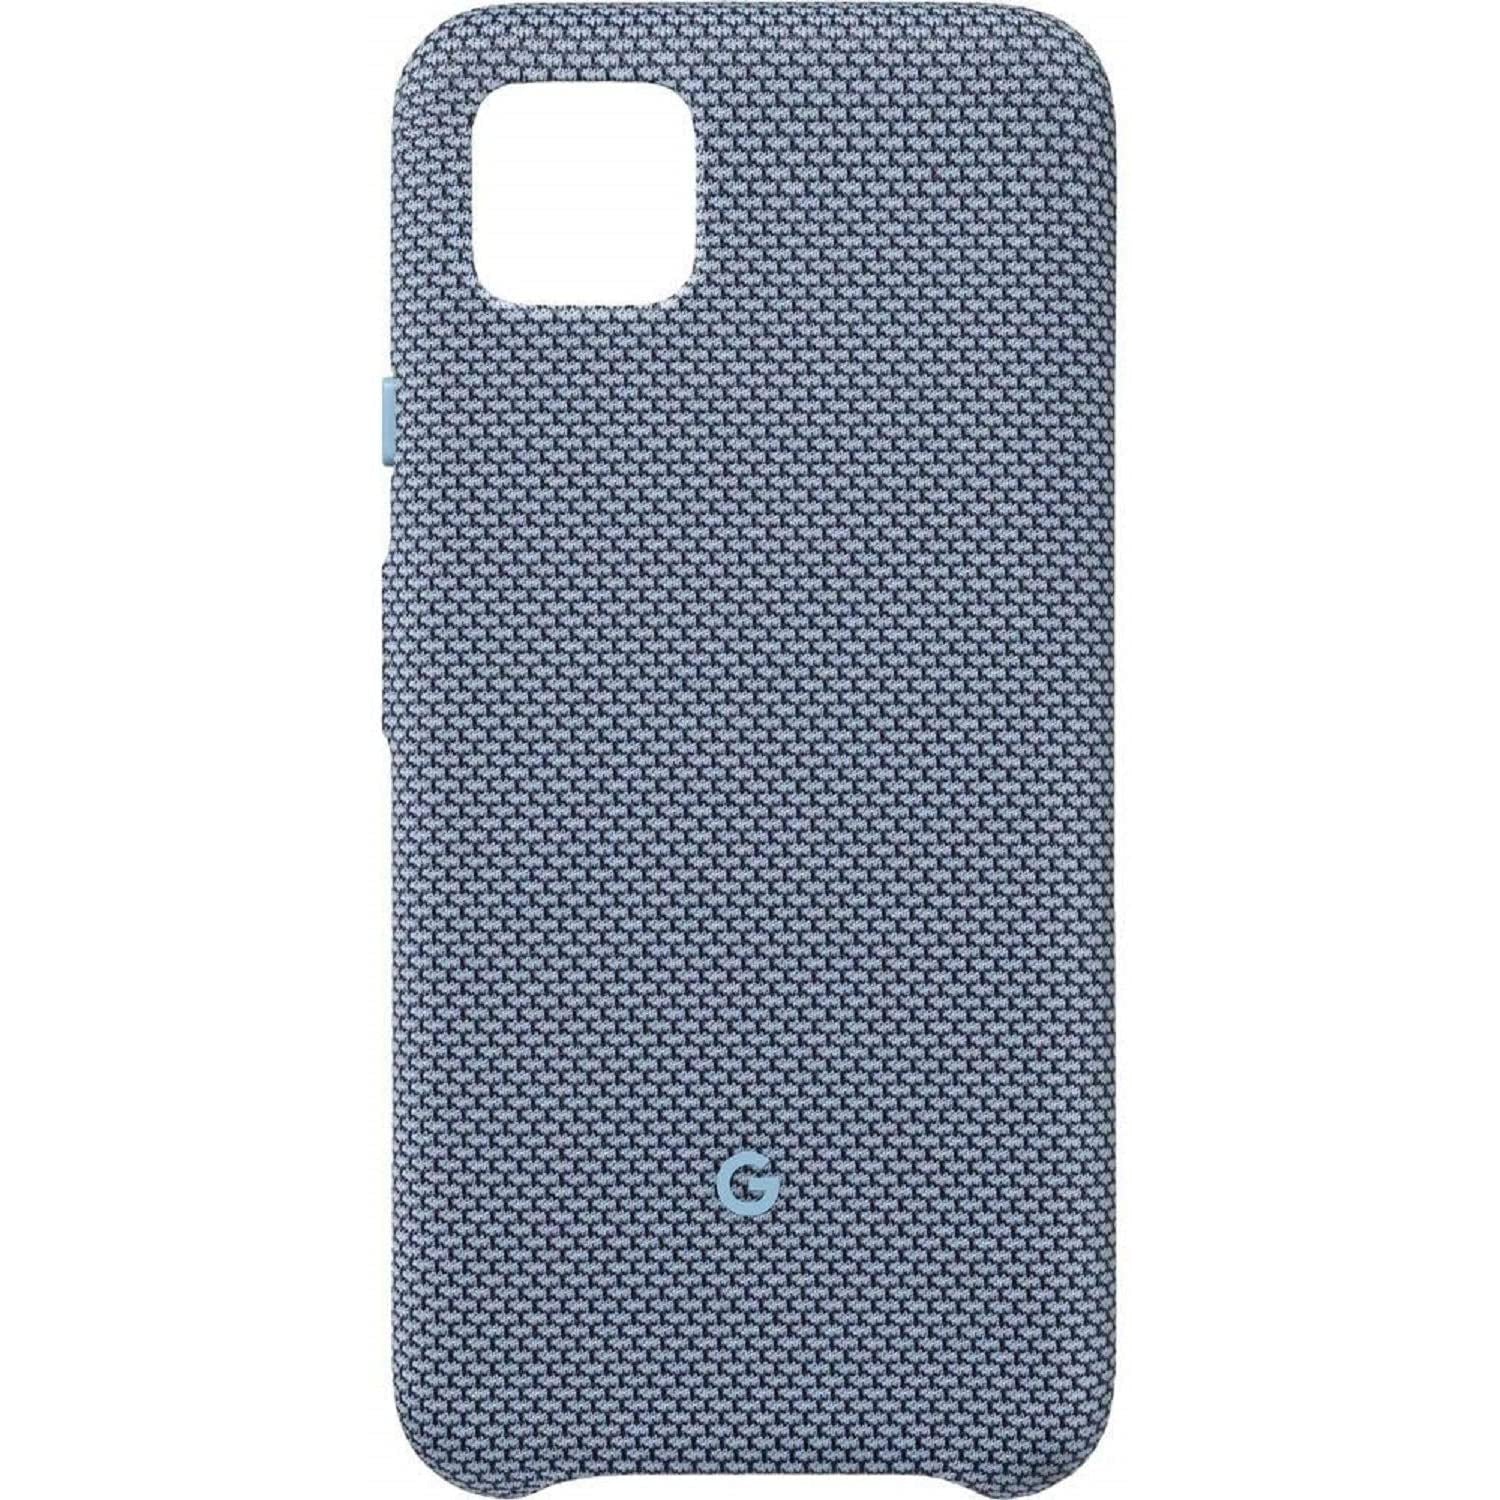 Google Pixel 4 Protective Phone Cover - Blue - New